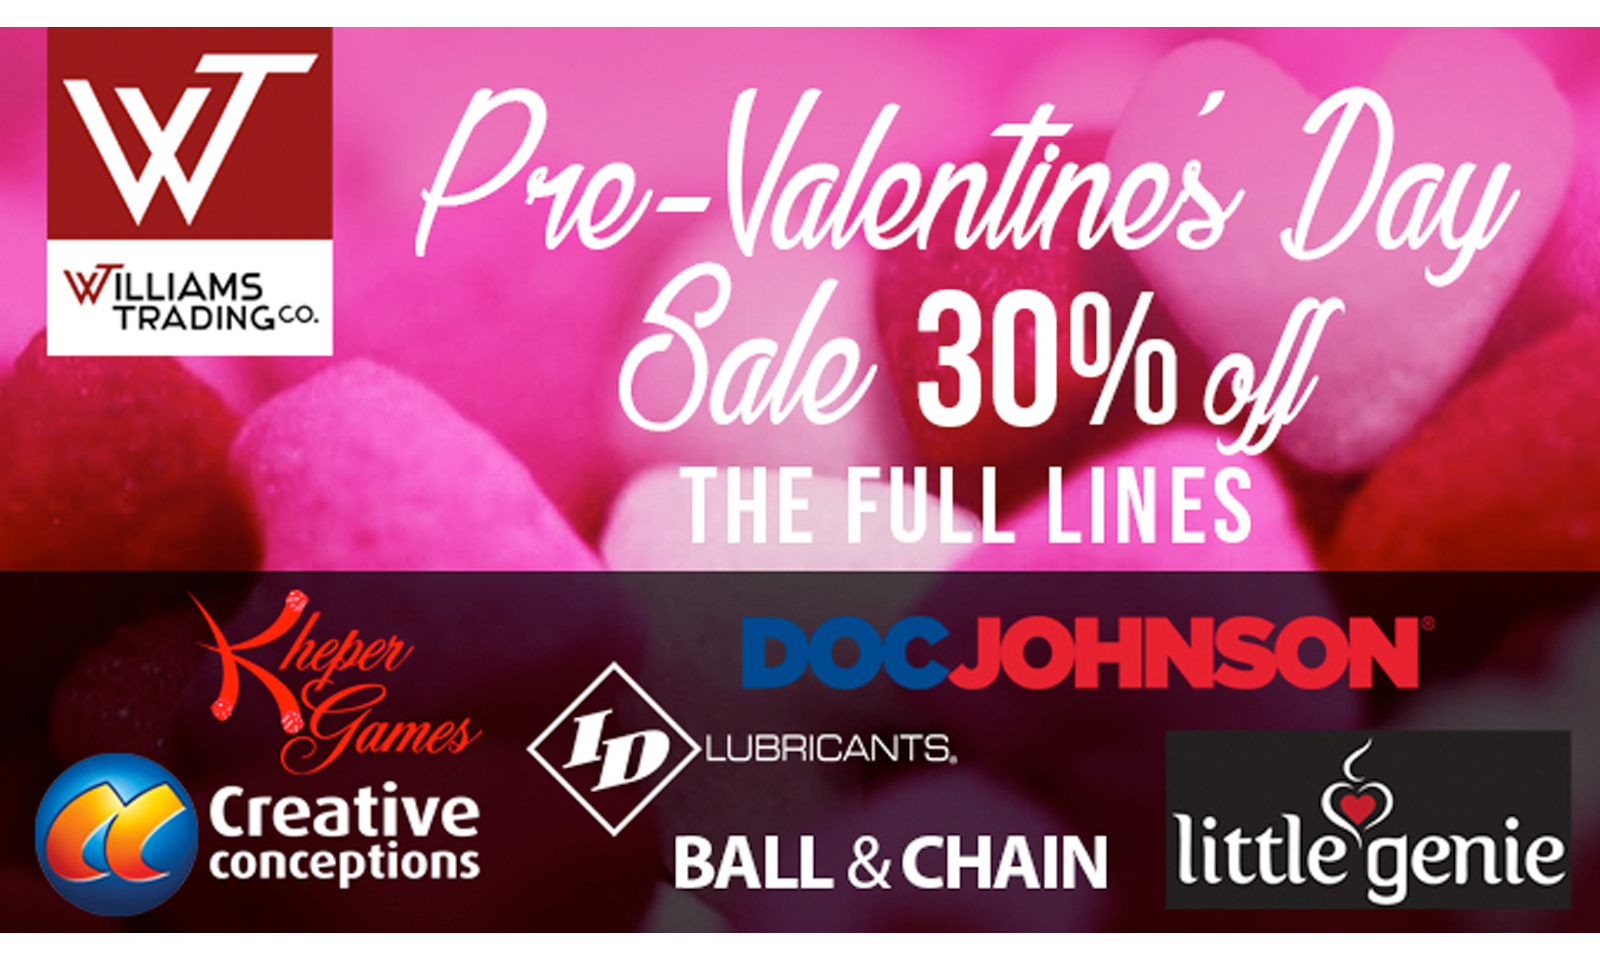 Williams Trading Starts New Year With Pre-Valentine’s Day Sale